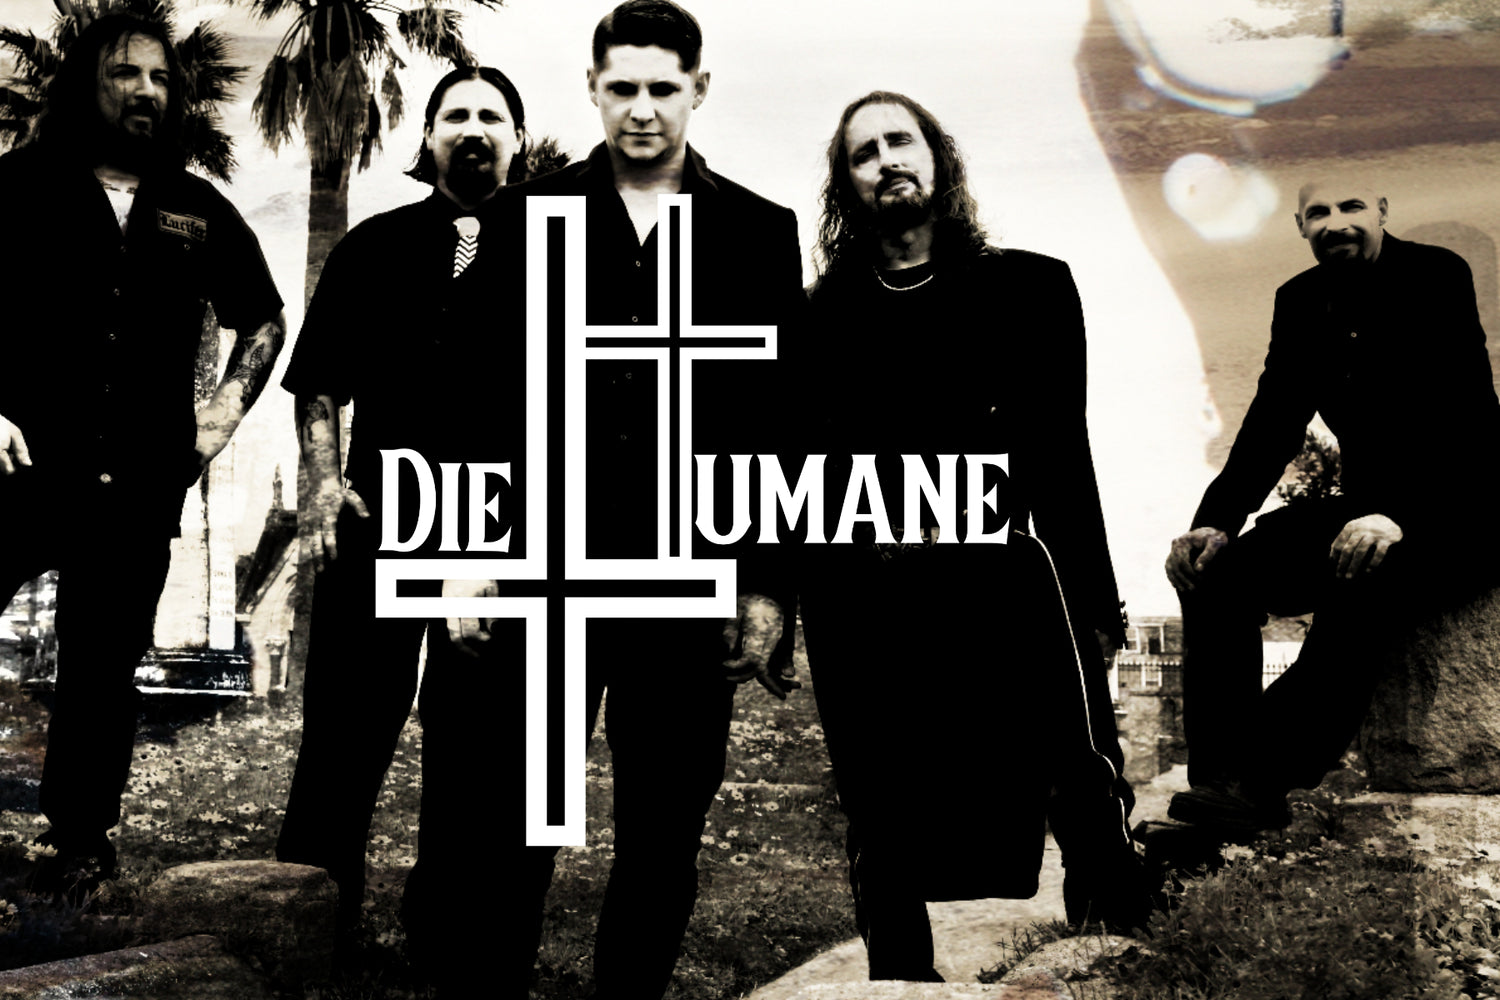 DieHumane banner showing the logo and the band dressed in black in a cemetery